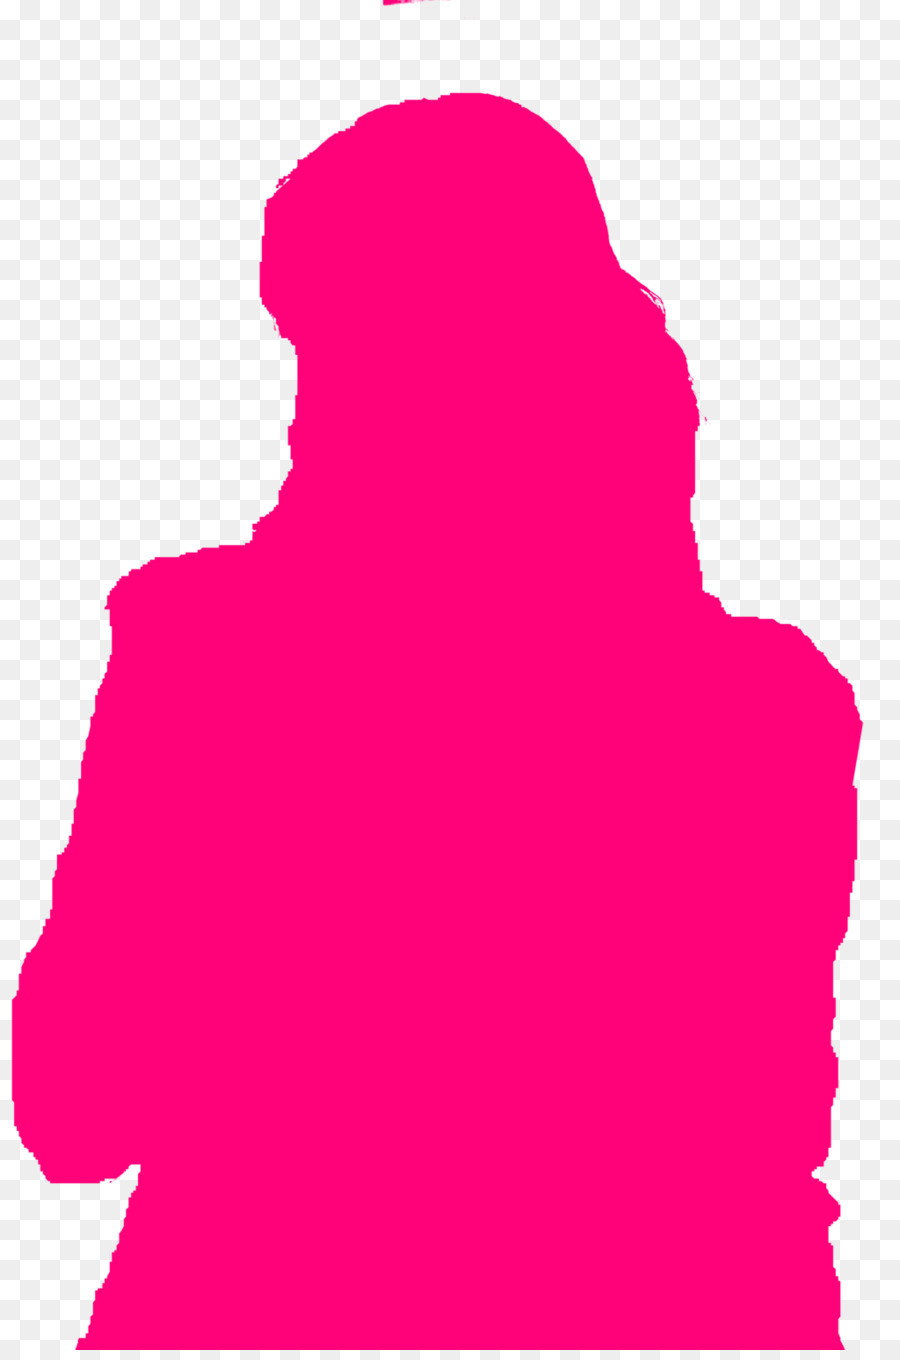 Artiste，Silhouette PNG